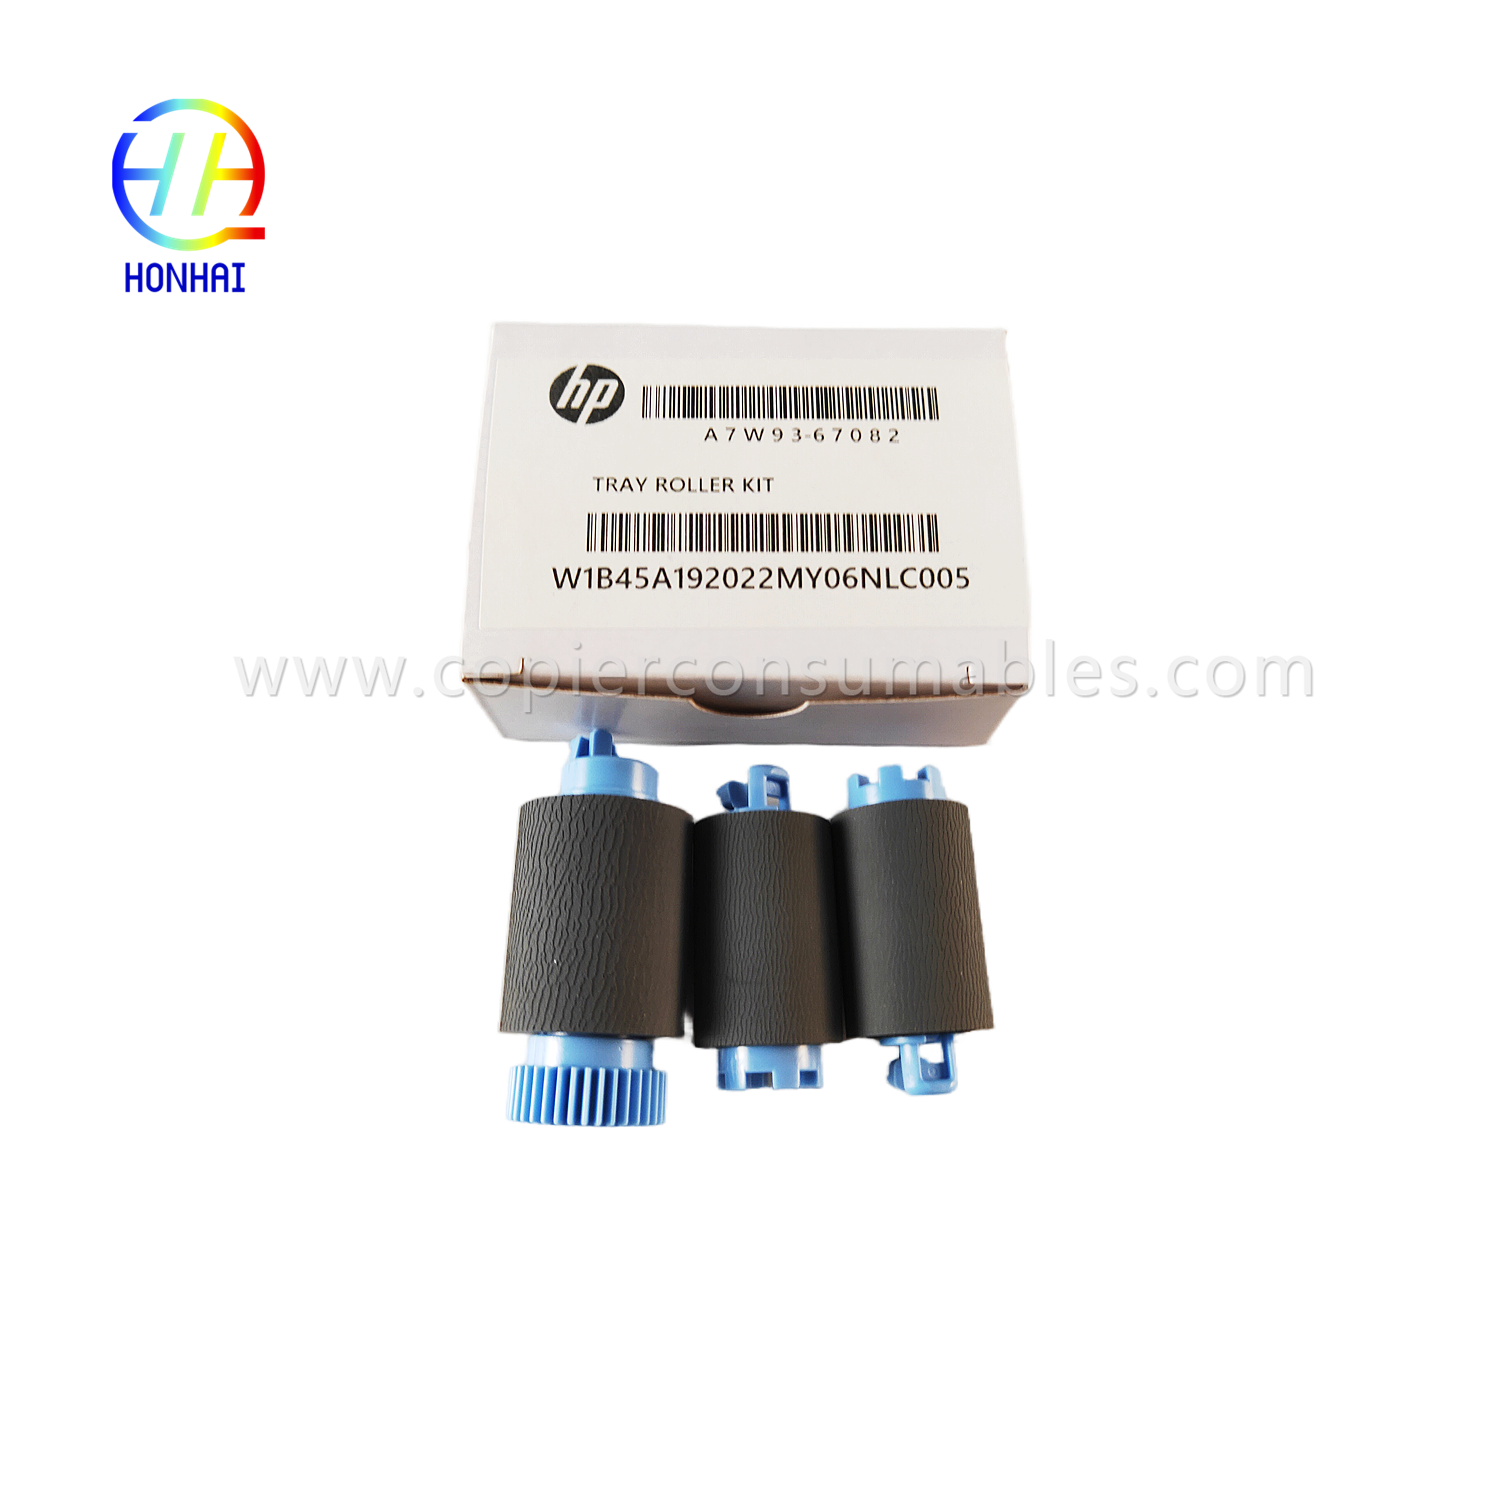 https://c585.goodao.net/tray-2-5-pickup-feed-separation-roller-set-for-hp-a7w93-67082-mfp-785f-780dn-e77650z-e77660z-e77650dn-dn-e766dn-776 p77750z-p77760z-p75050dn-p75050dw-product/